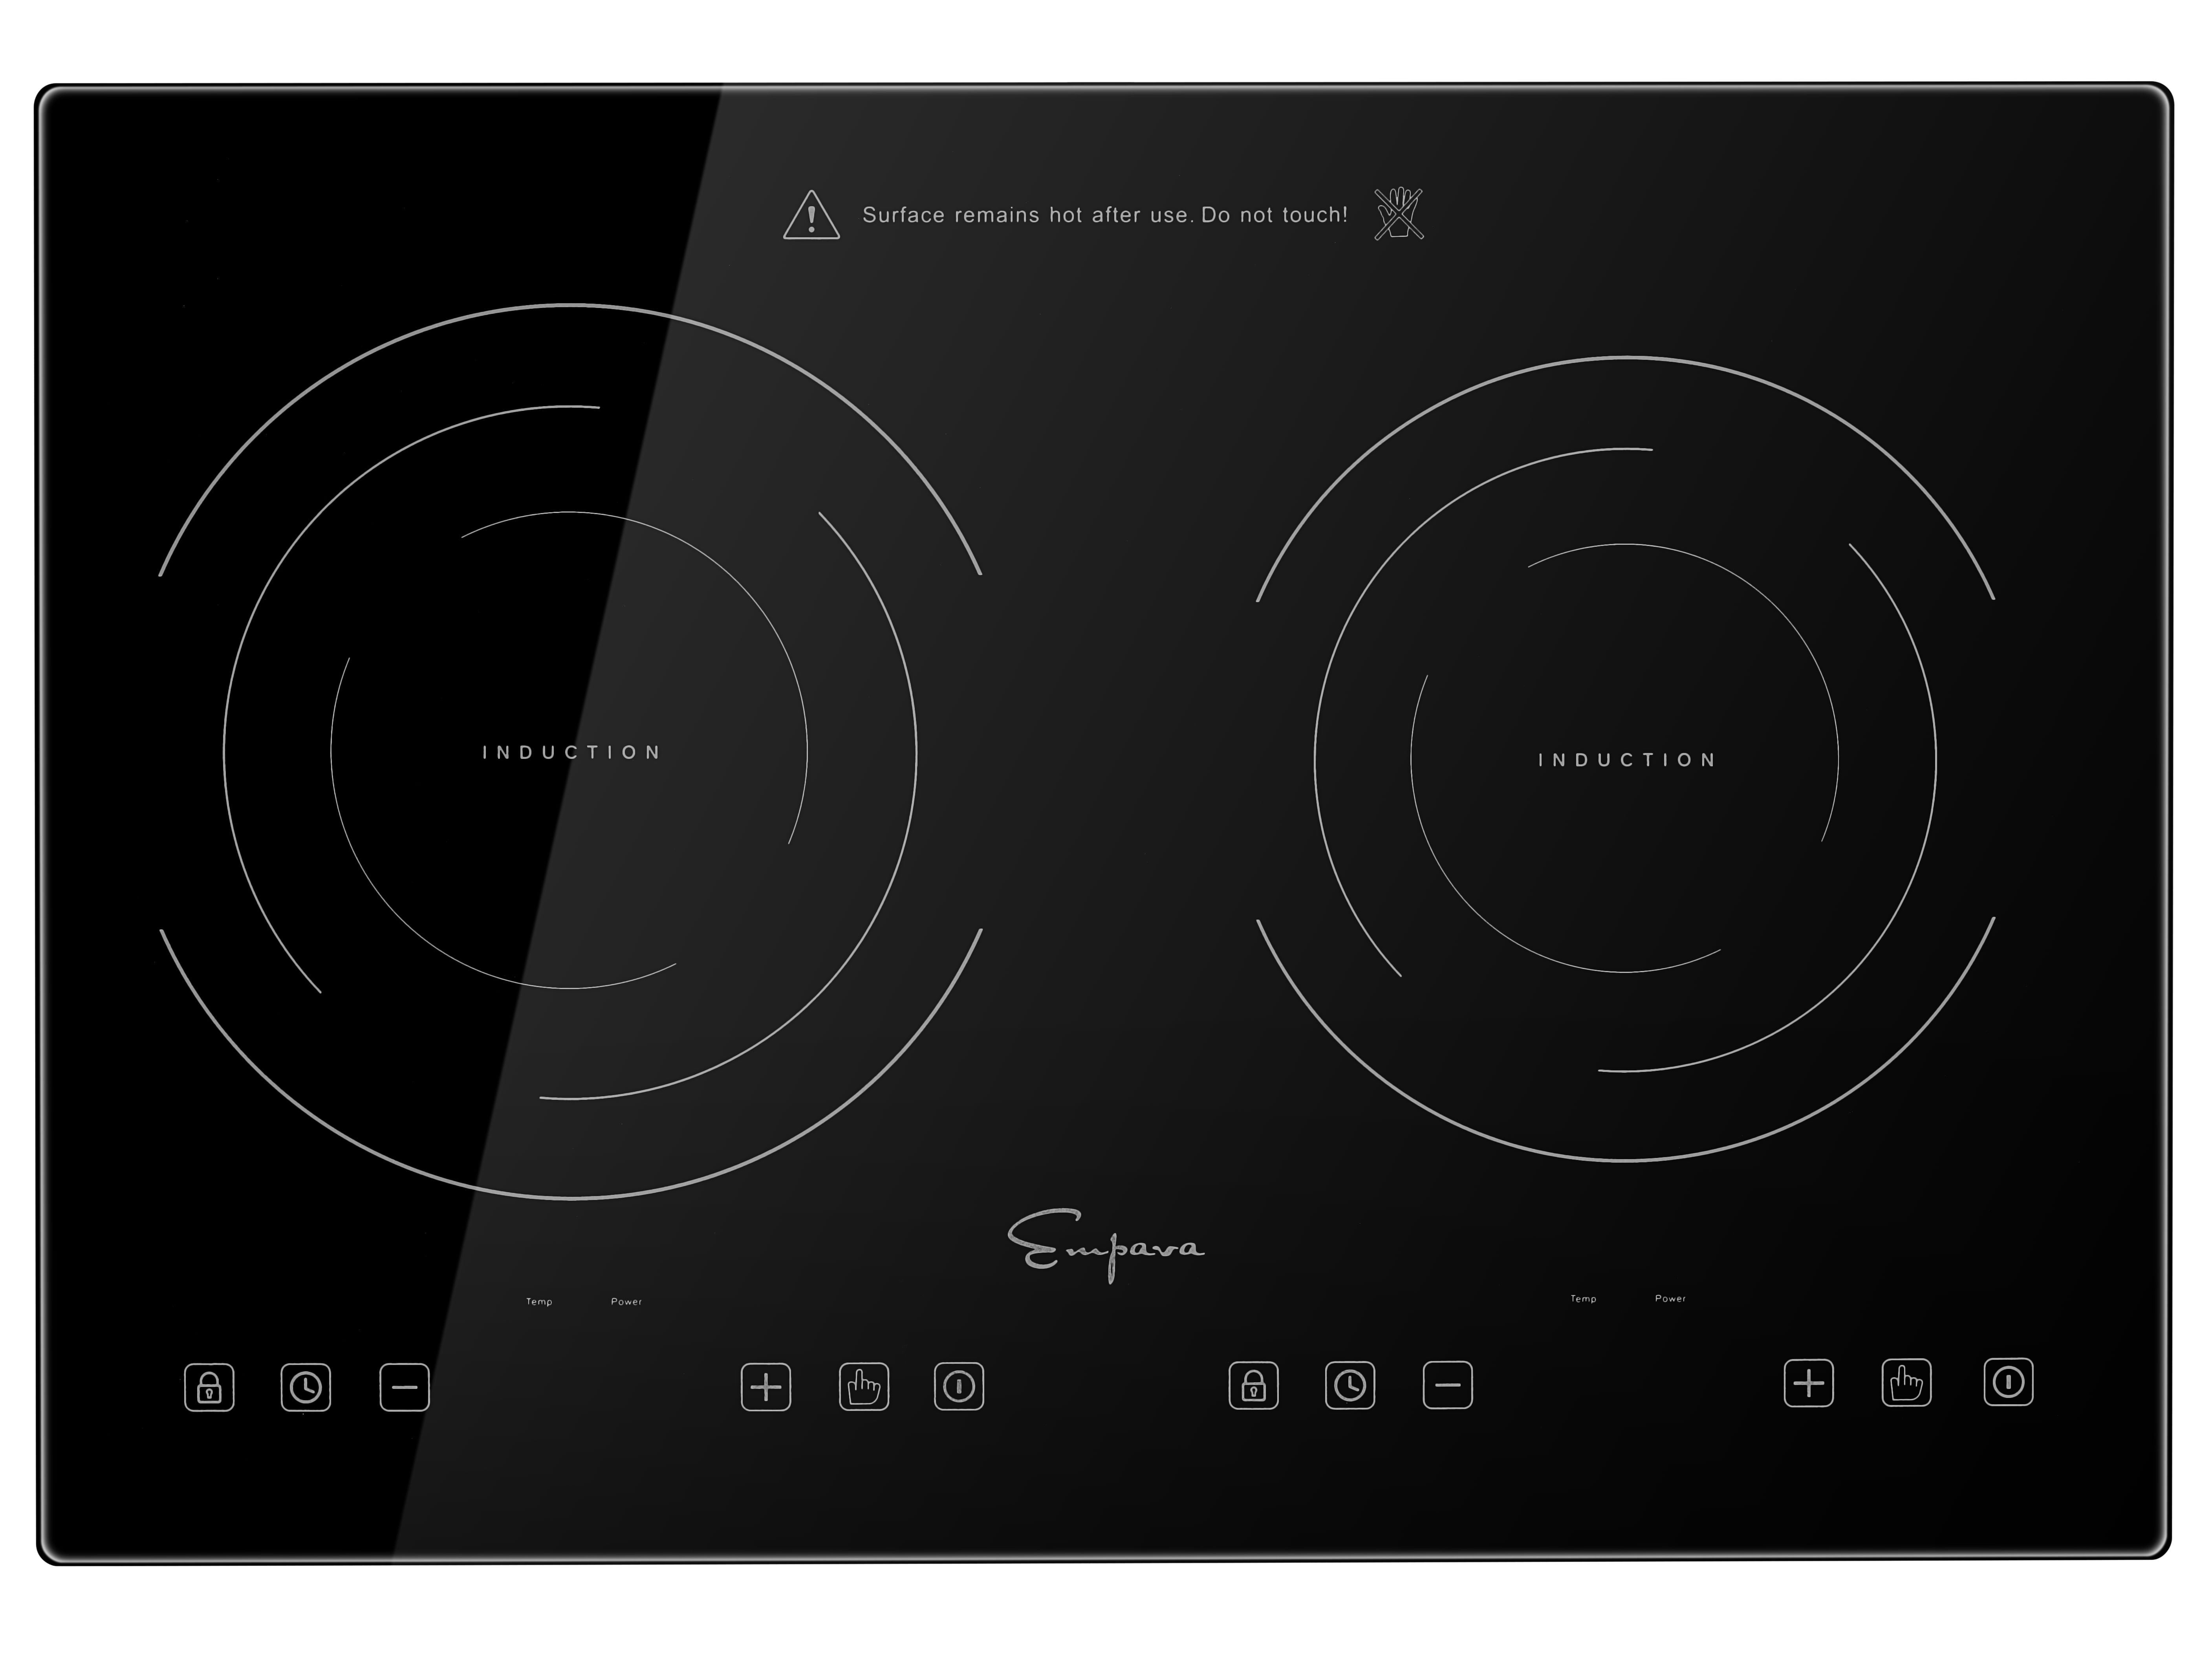 Electric 1300W Induction Cooker Portable Cooktop Burner Countertop Oven Home FDA 